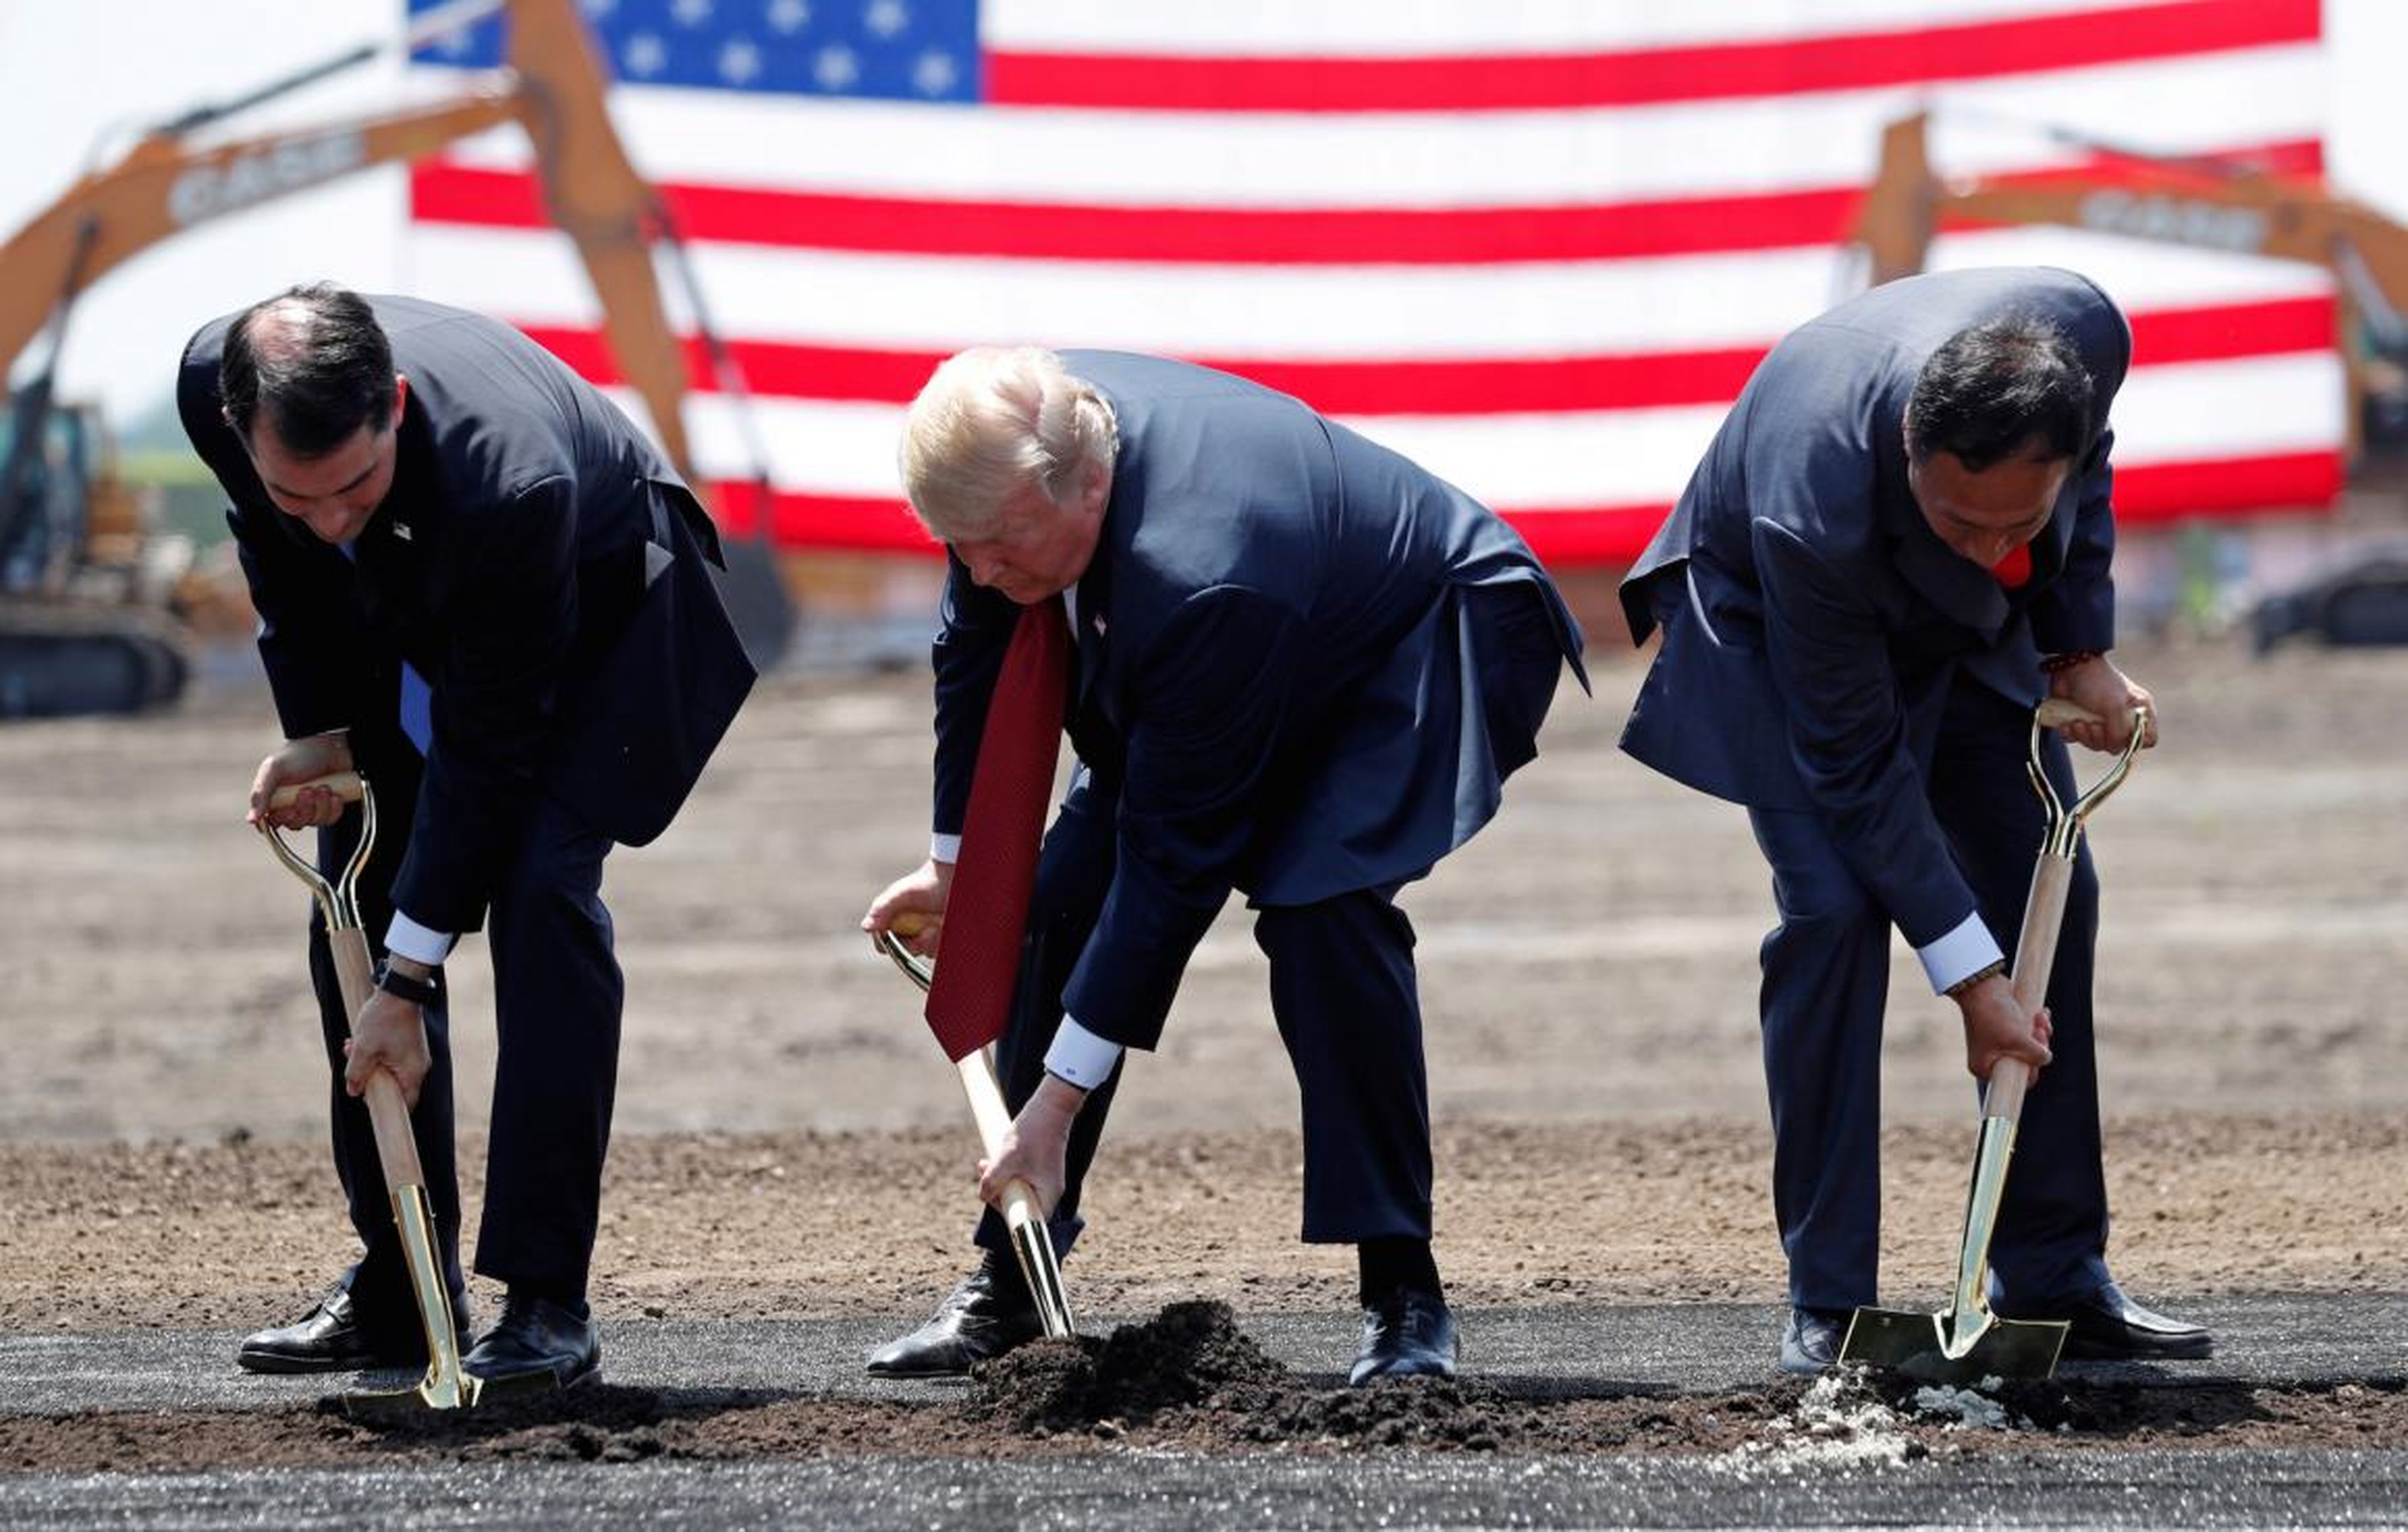 President Donald Trump taking part in a groundbreaking with Gov. Scott Walker of Wisconsin and Foxconn’s chairman, Terry Gou, during a visit to Foxconn's new site in Mount Pleasant, Wisconsin.